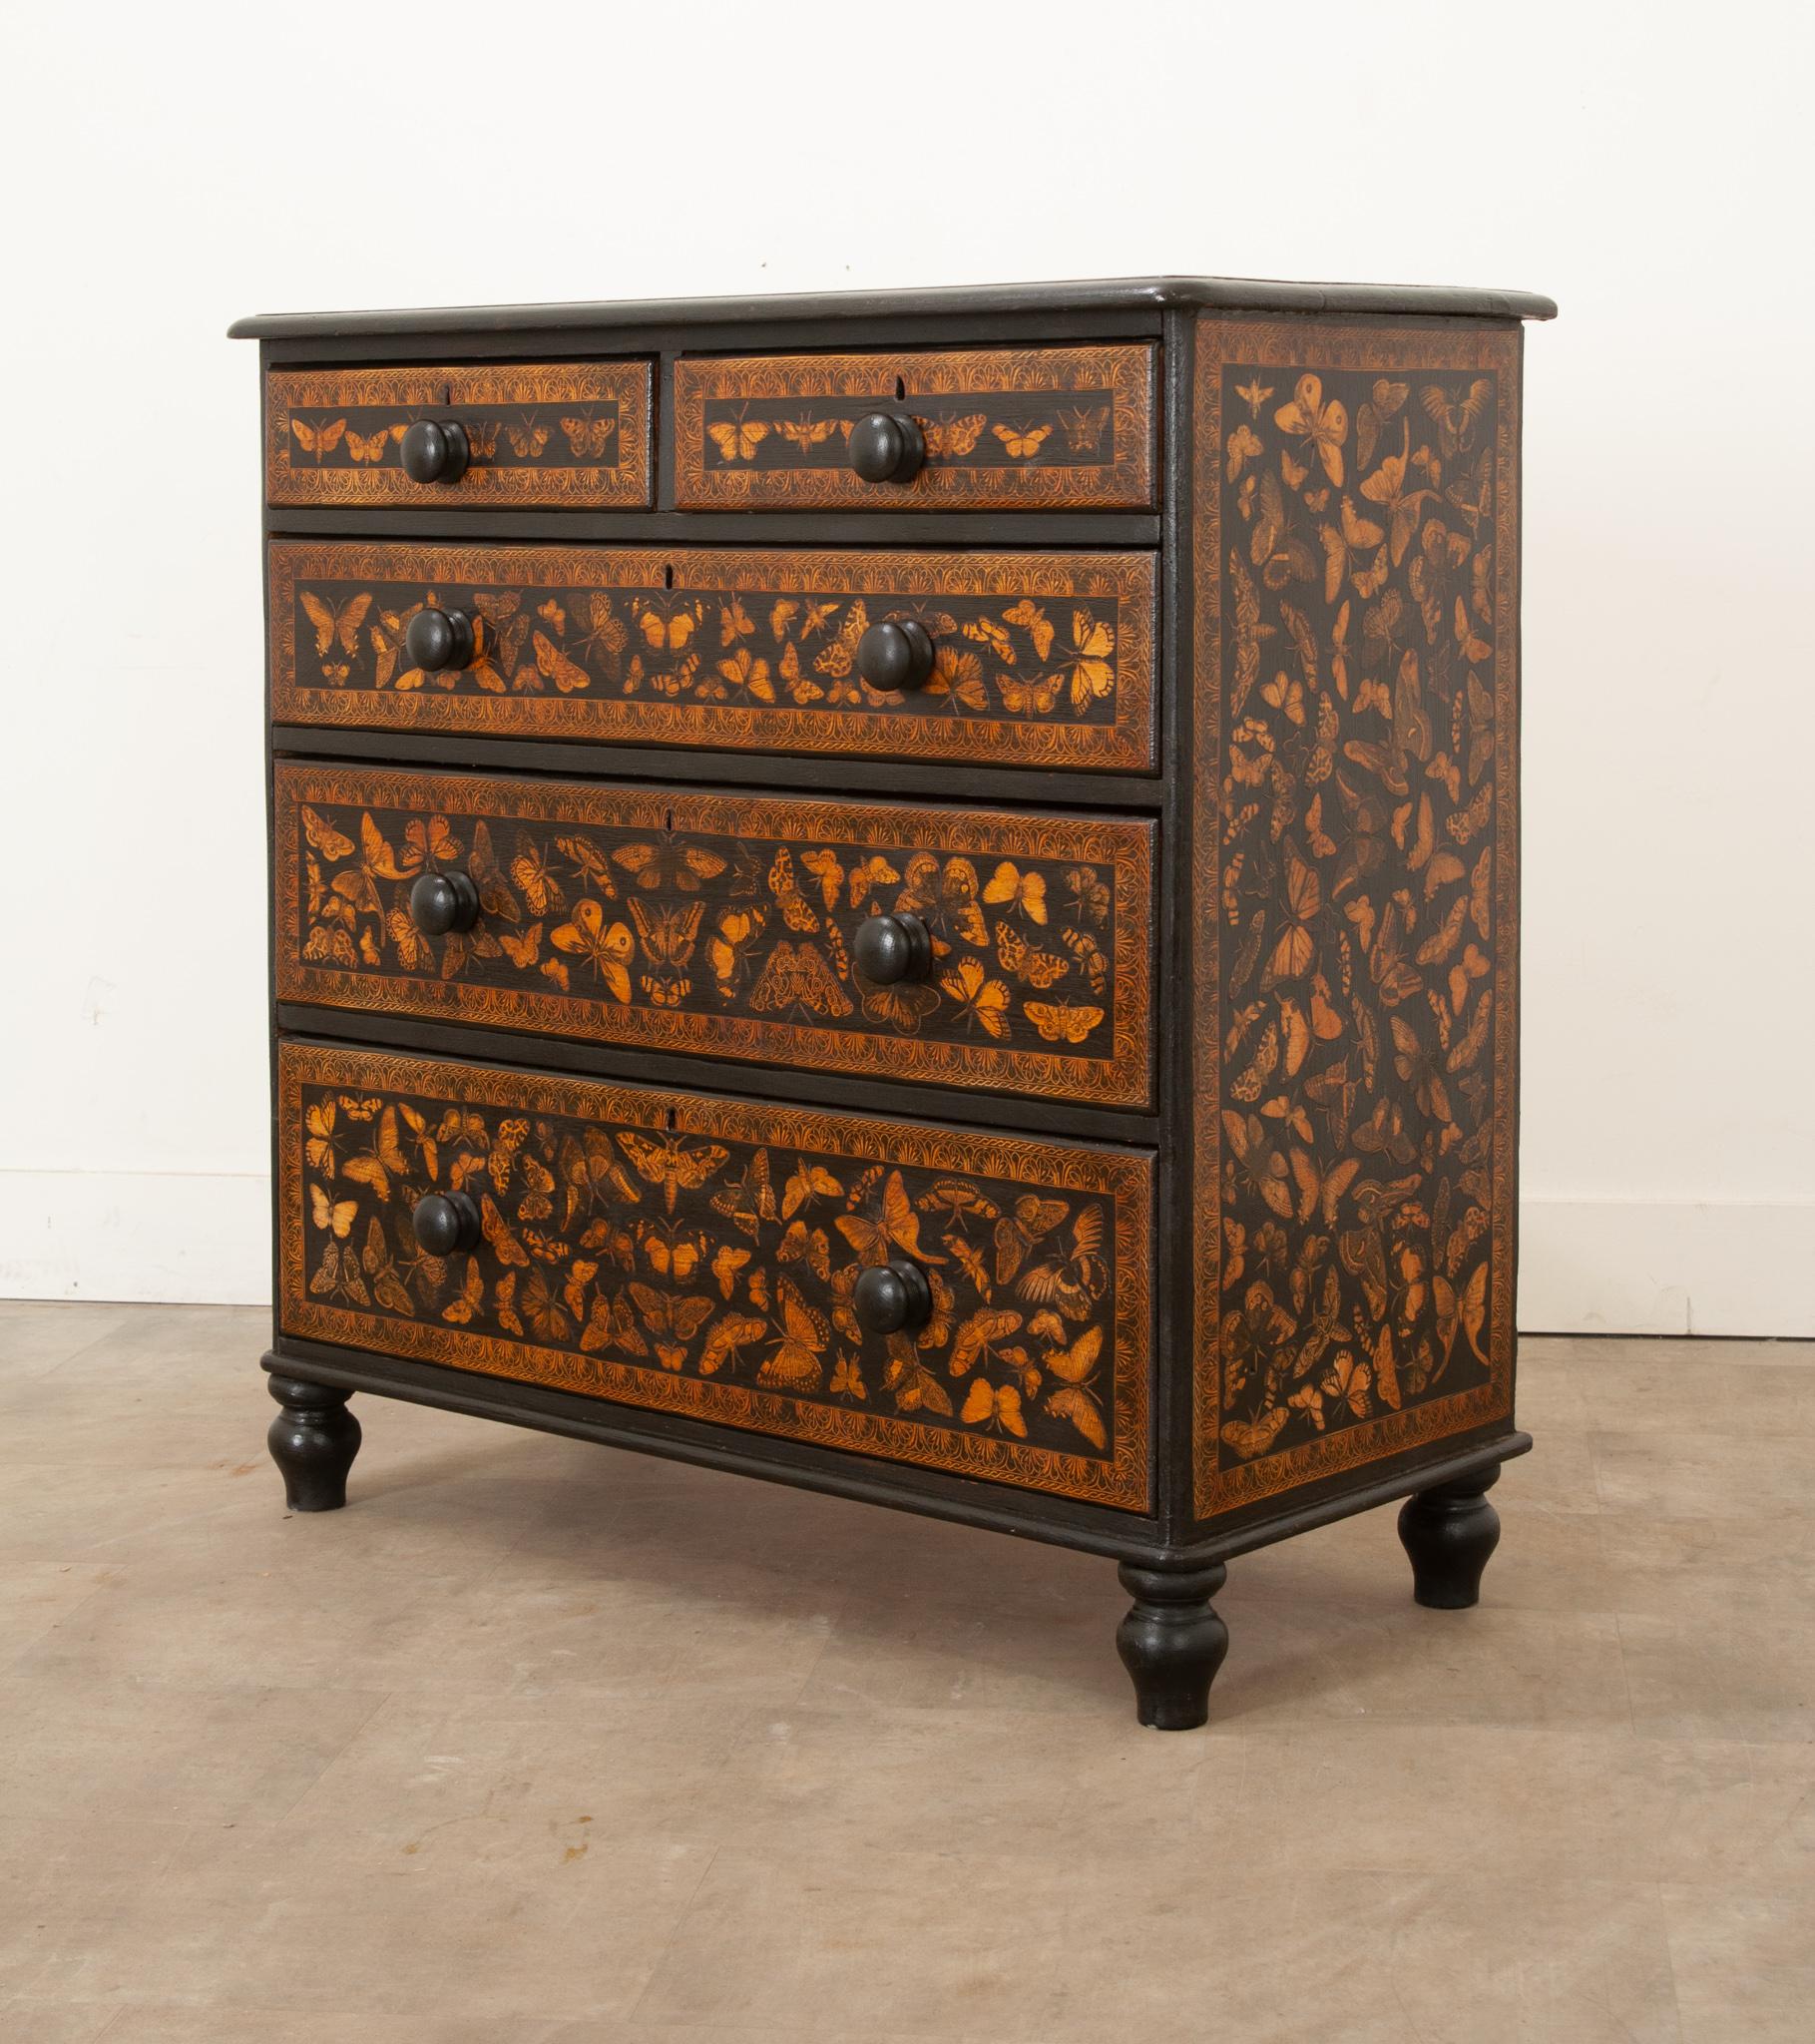 A playful twist on an antique pine chest of drawers. Recently painted black with a butterfly and moth decoupage design. This chest will add a whimsical flair to any room in your house, especially a bedroom as there is plenty of storage inside its